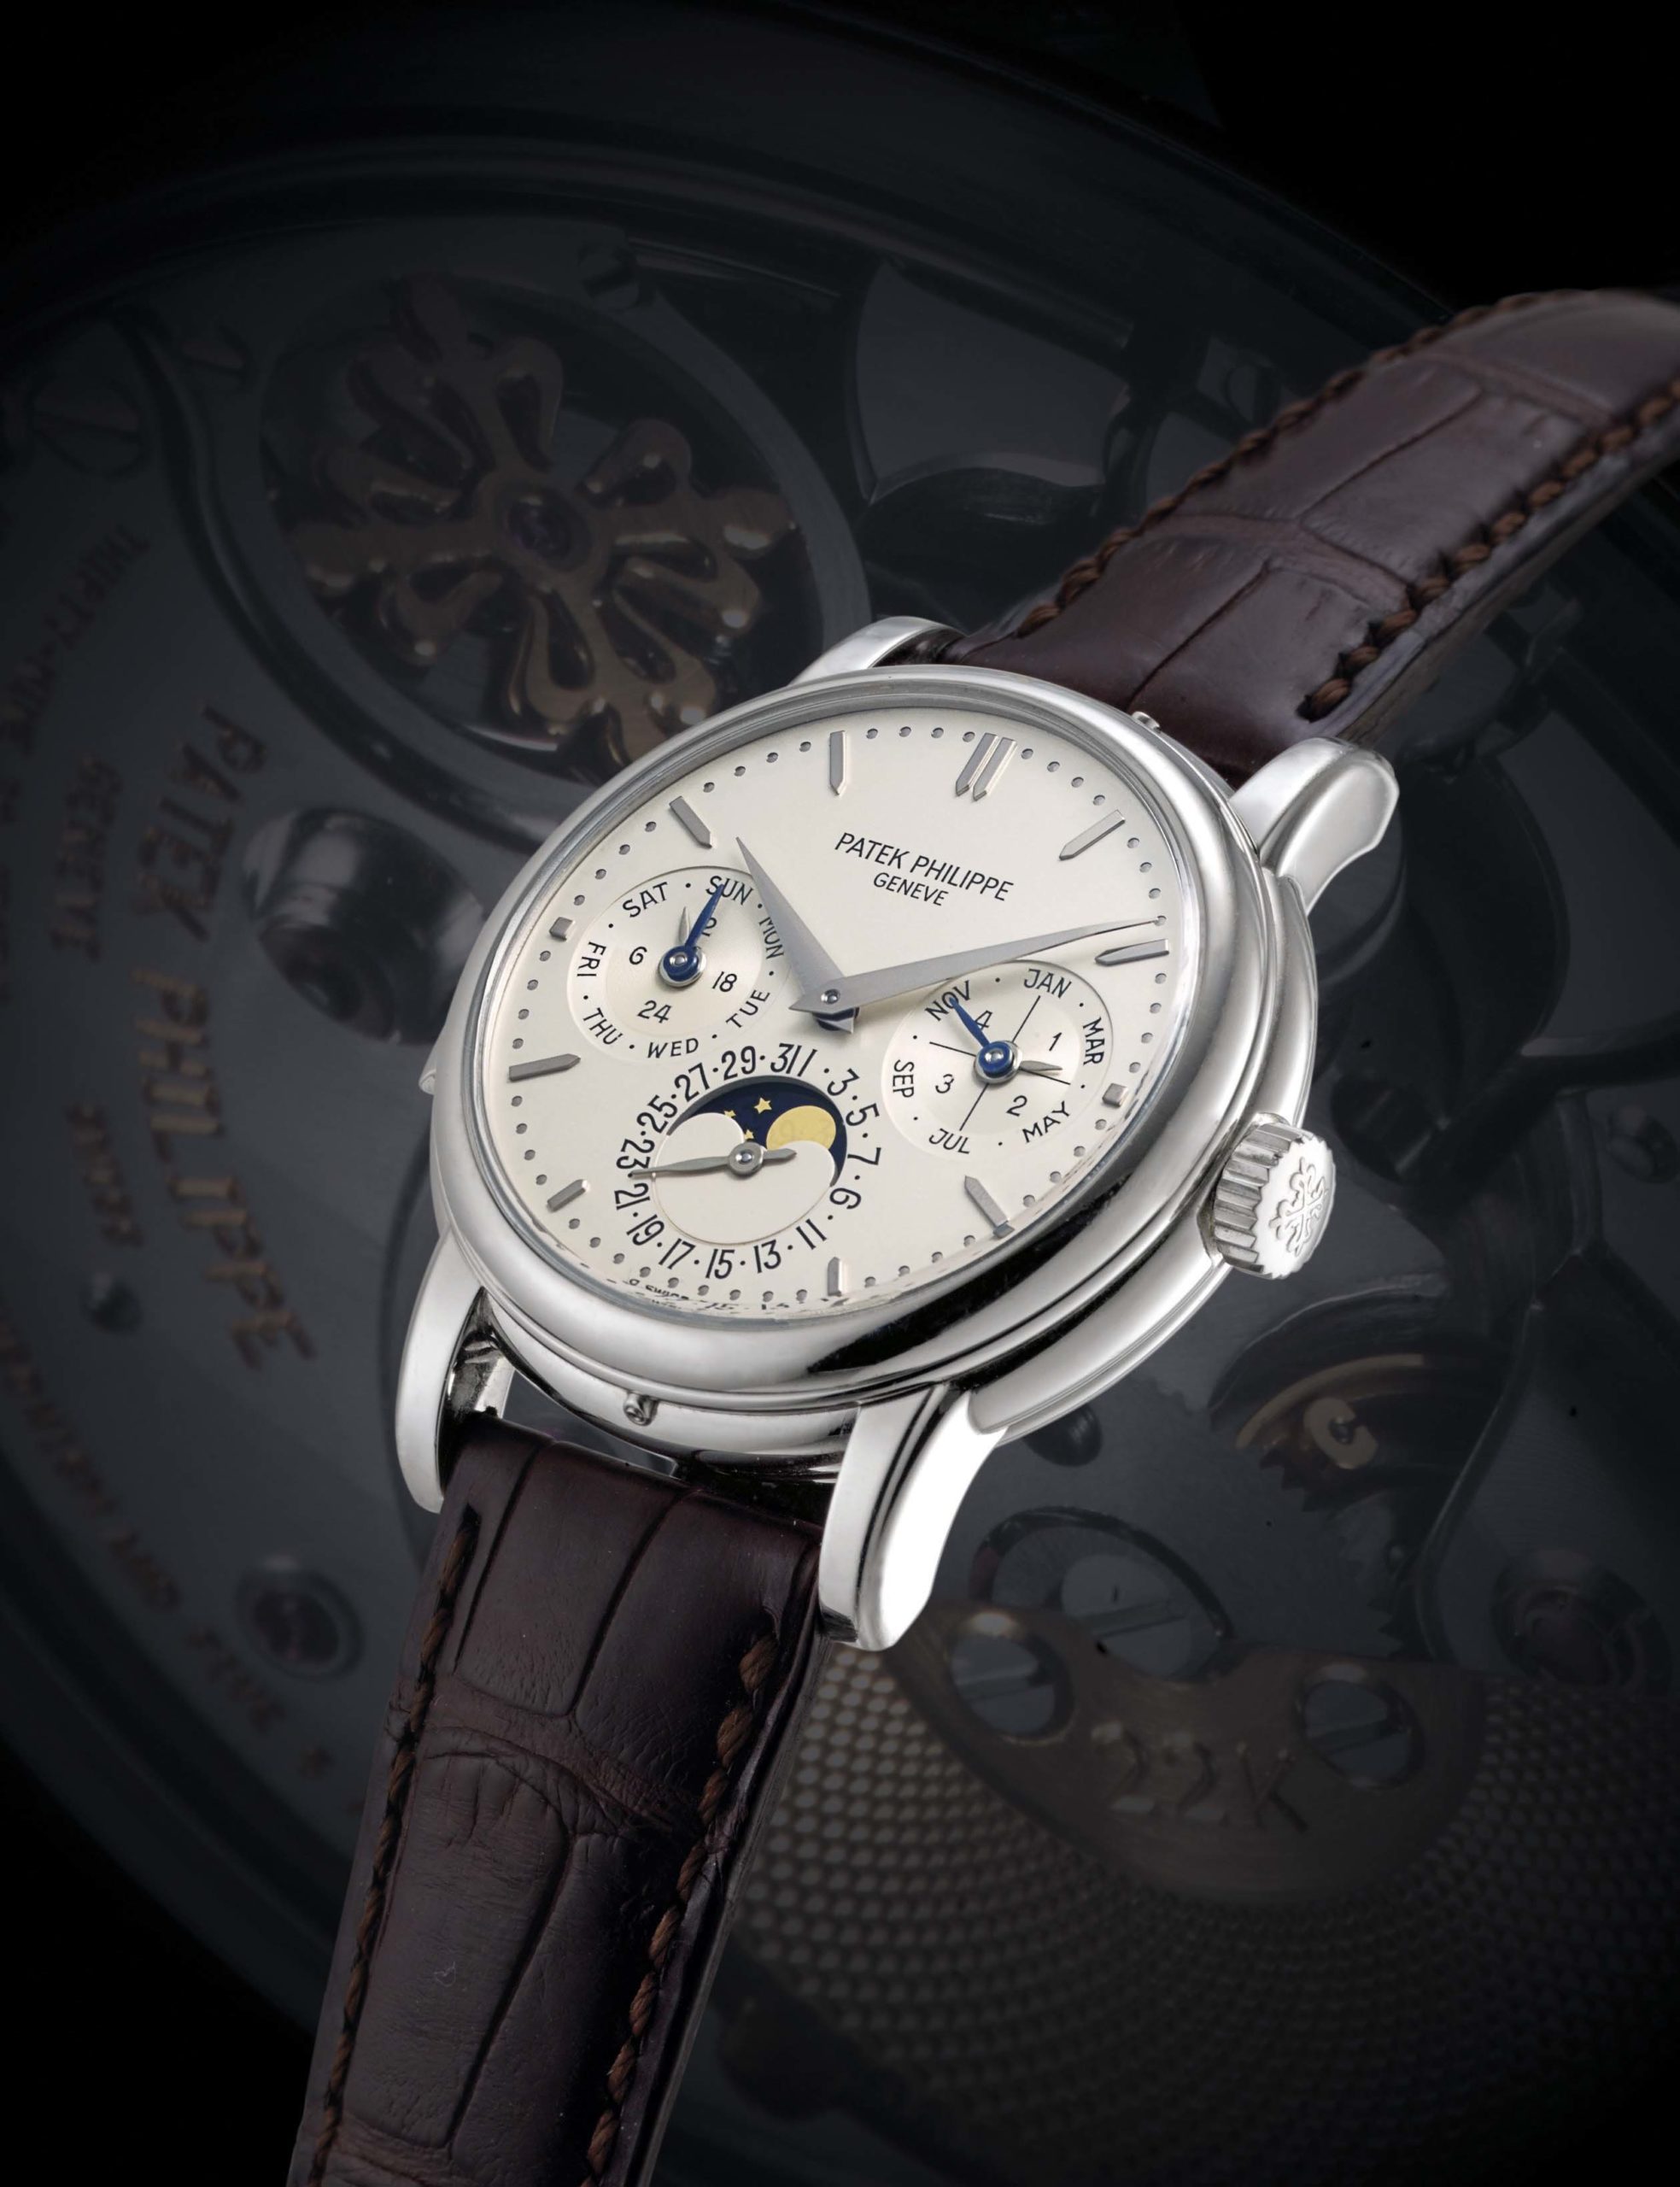 Patek Philippe's Minute-Repeater History narrated - HIGHTIME